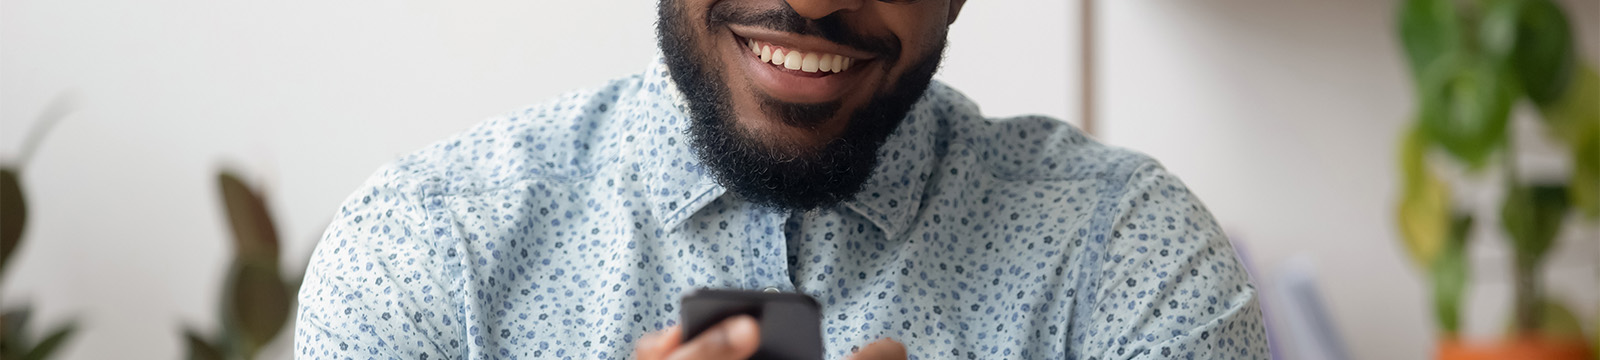 guy with beard smiling as he looks at this phone screen